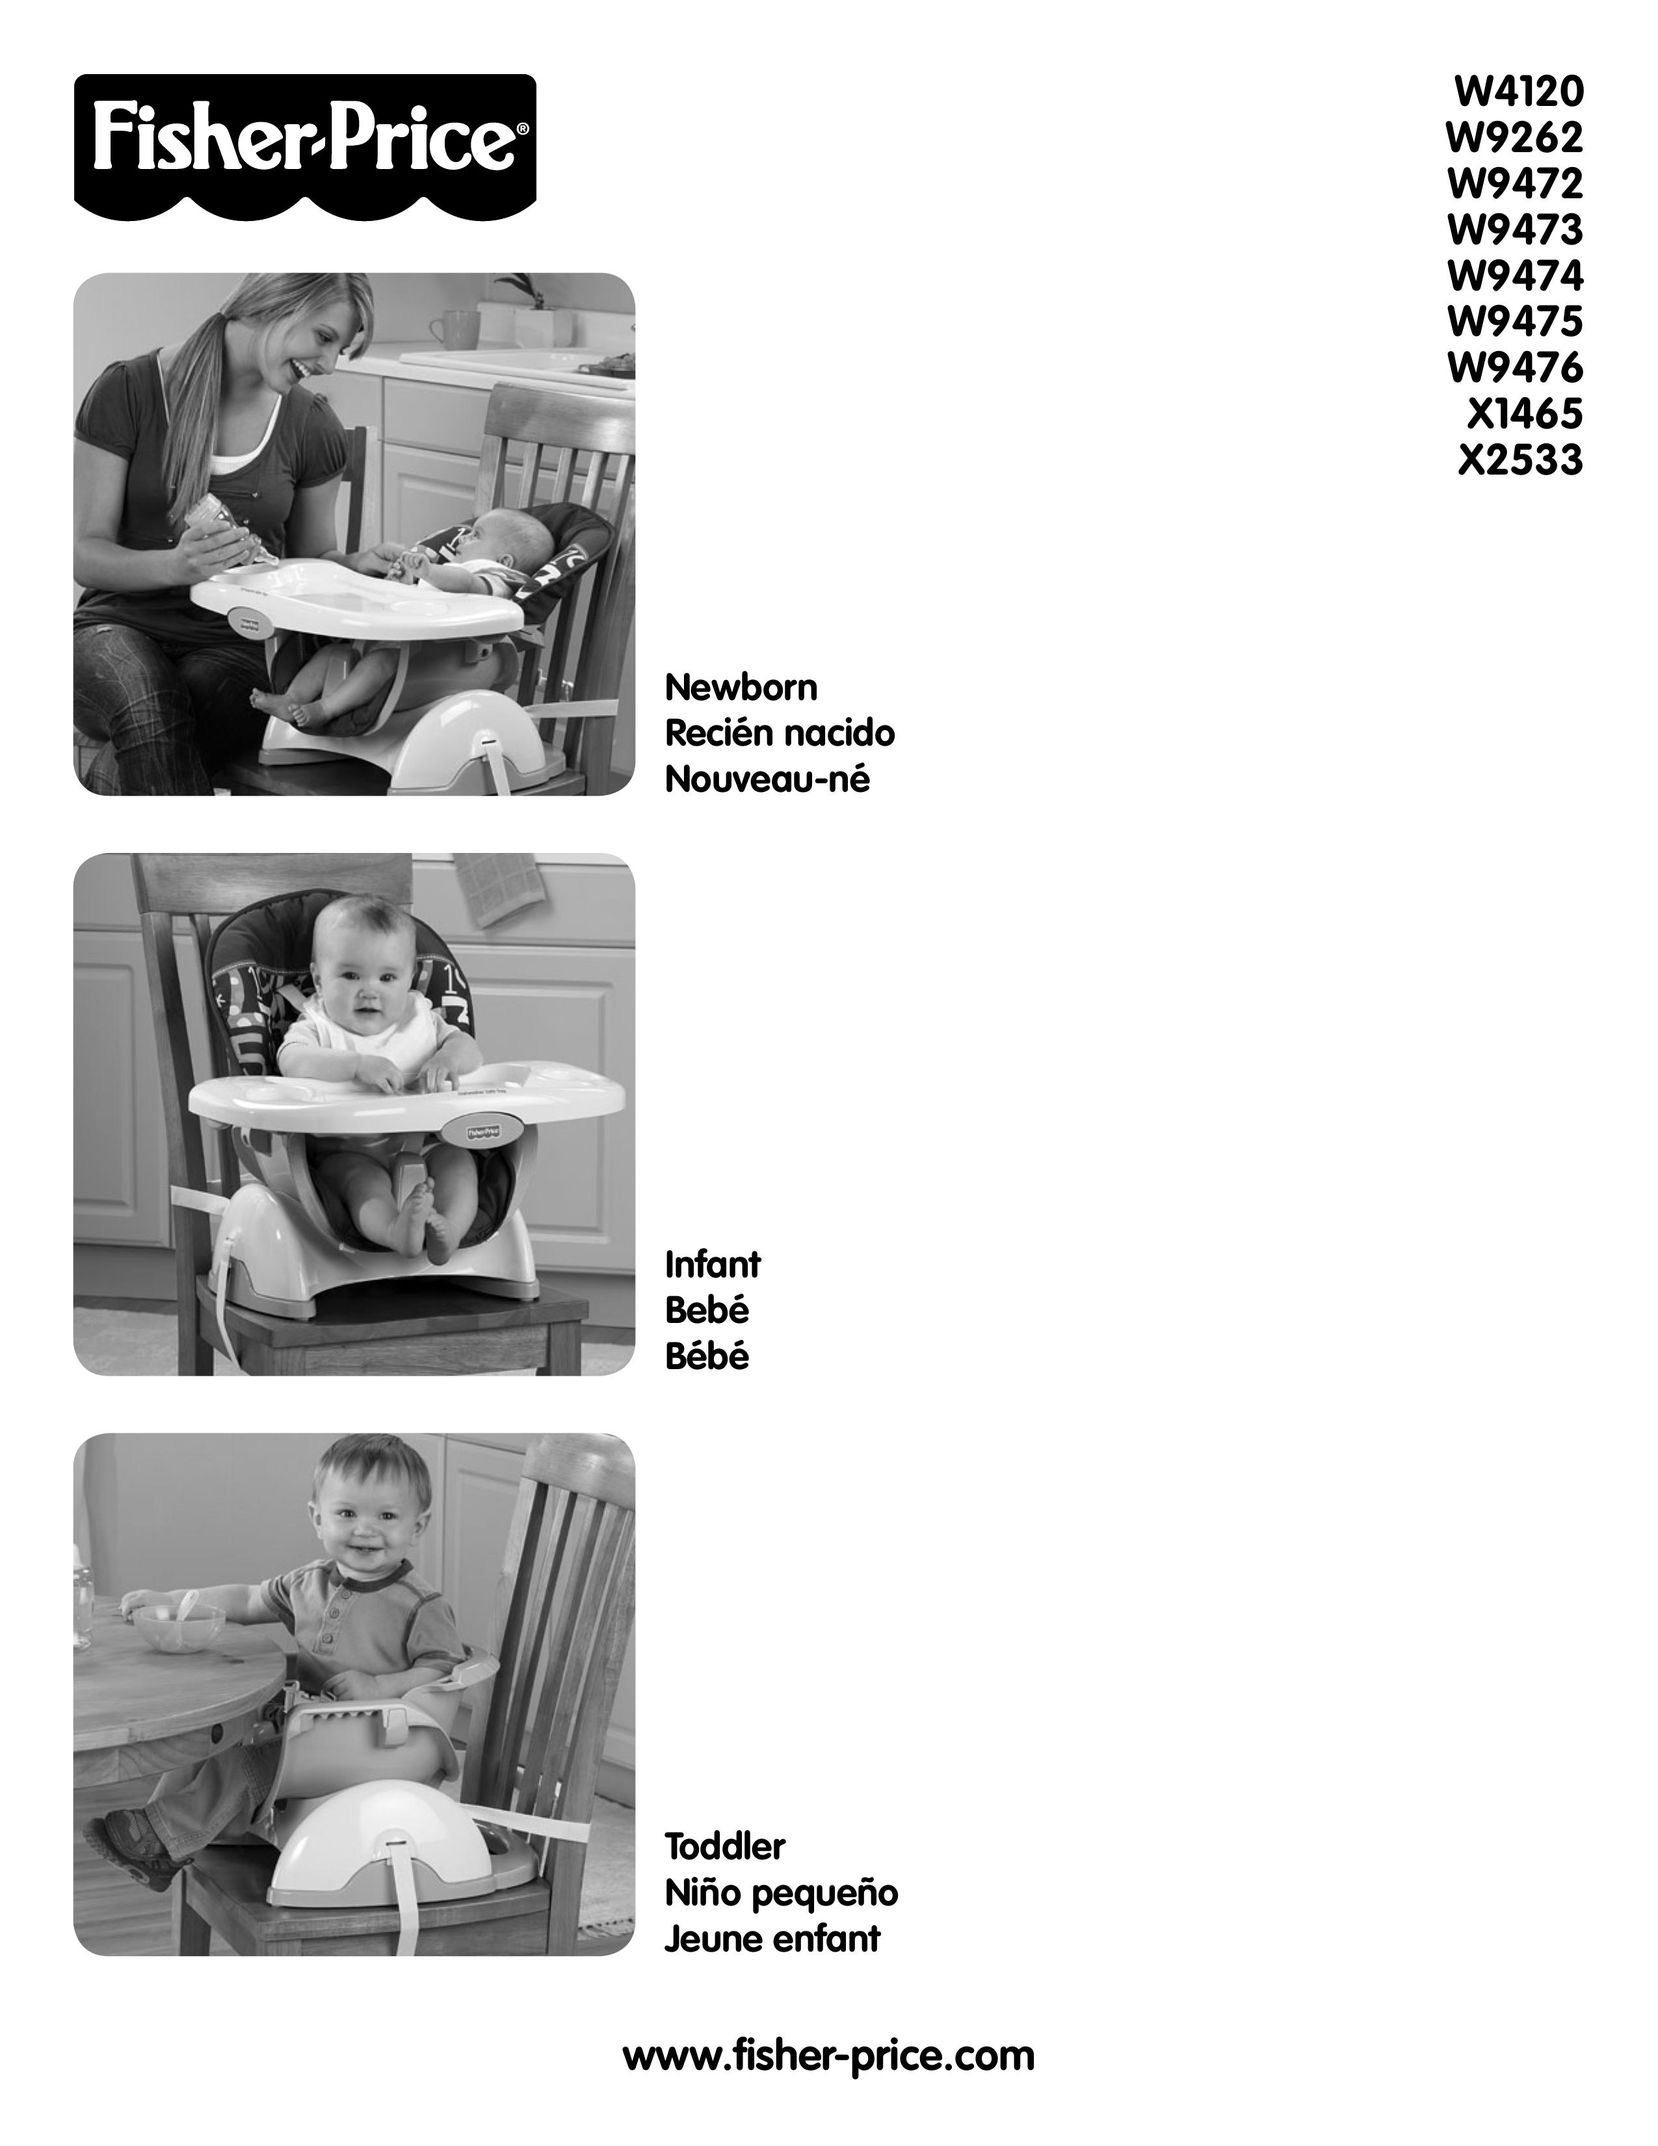 Fisher-Price W9472 High Chair User Manual